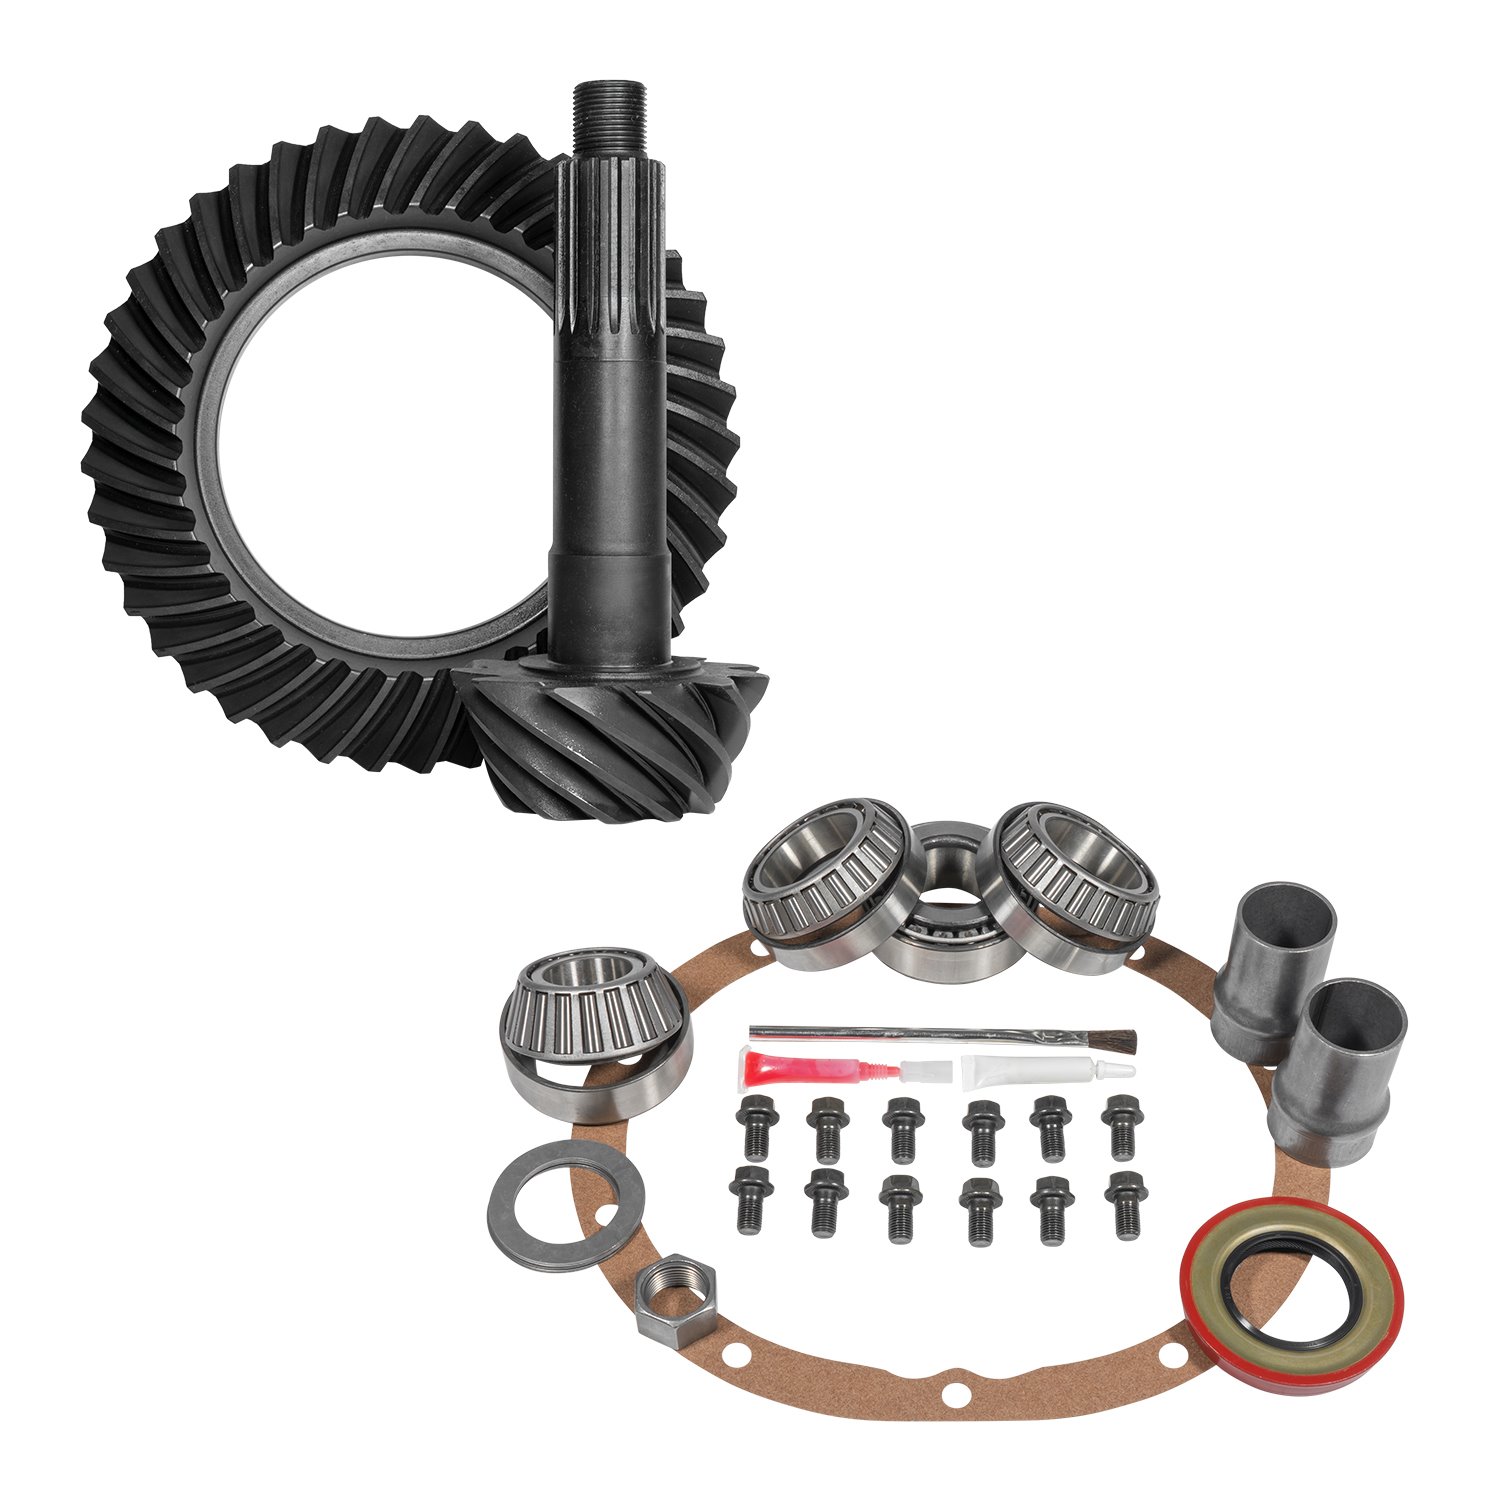 Muscle Car Re-Gear Kit For GM 55P Differential, 17 Spline, 3.55 Ratio